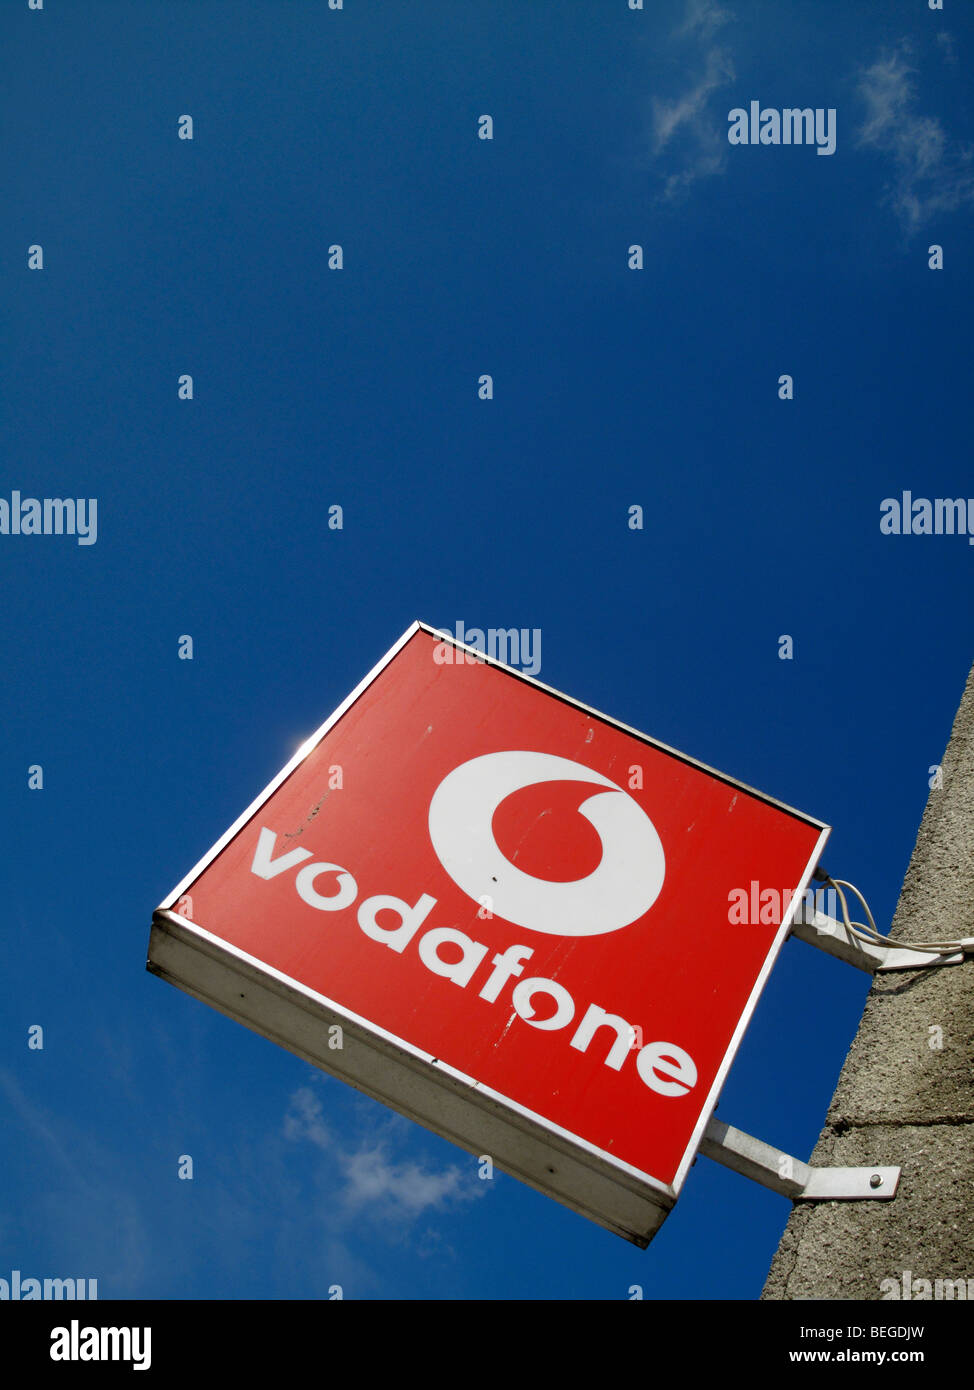 Sign for a Vodafone mobile phone or cellphone store Stock Photo - Alamy